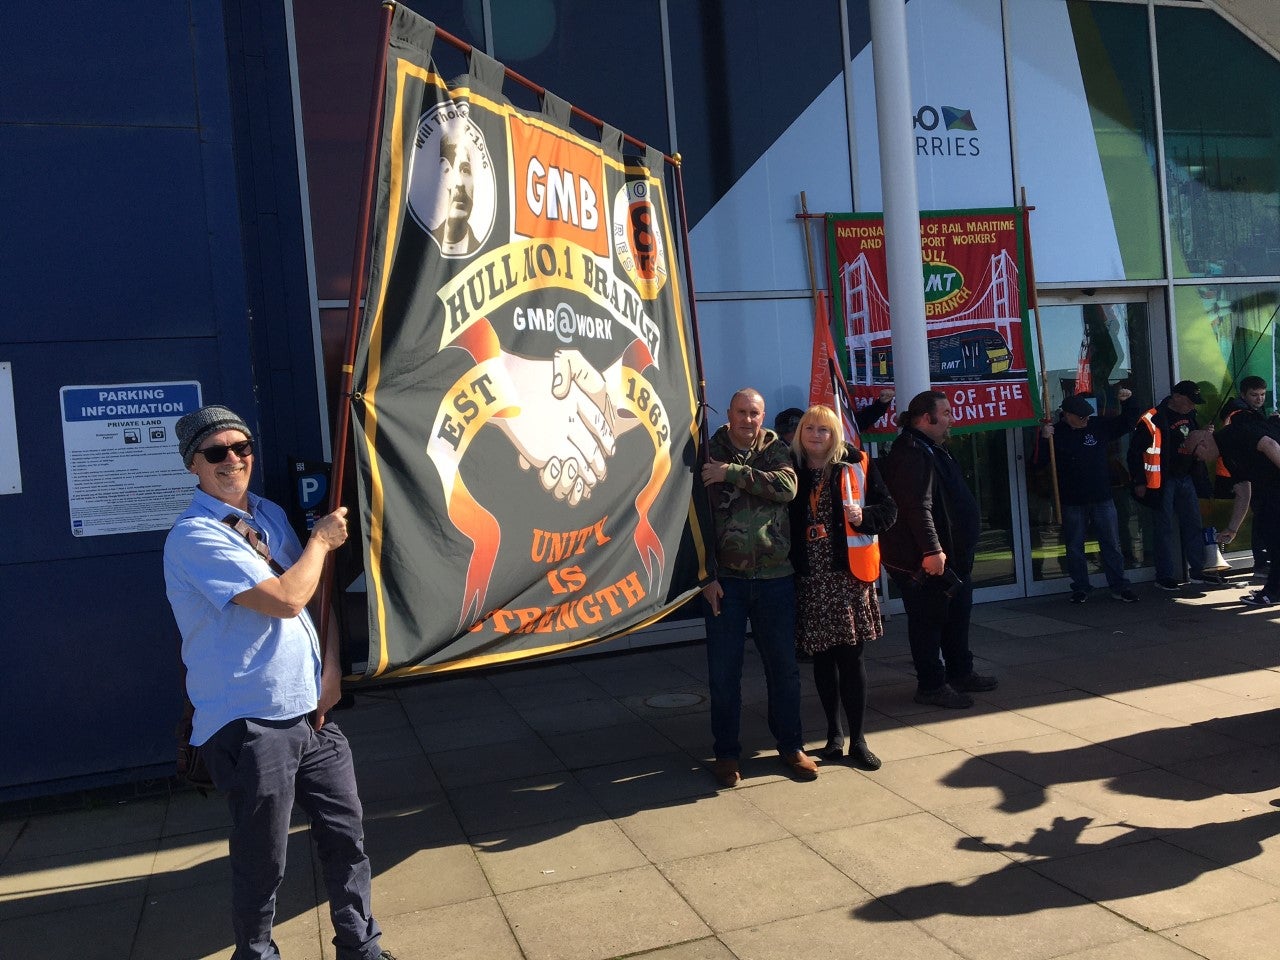 ‘These are lives they are ruining. Via video link,’ says GMB union convenor Carl Burn